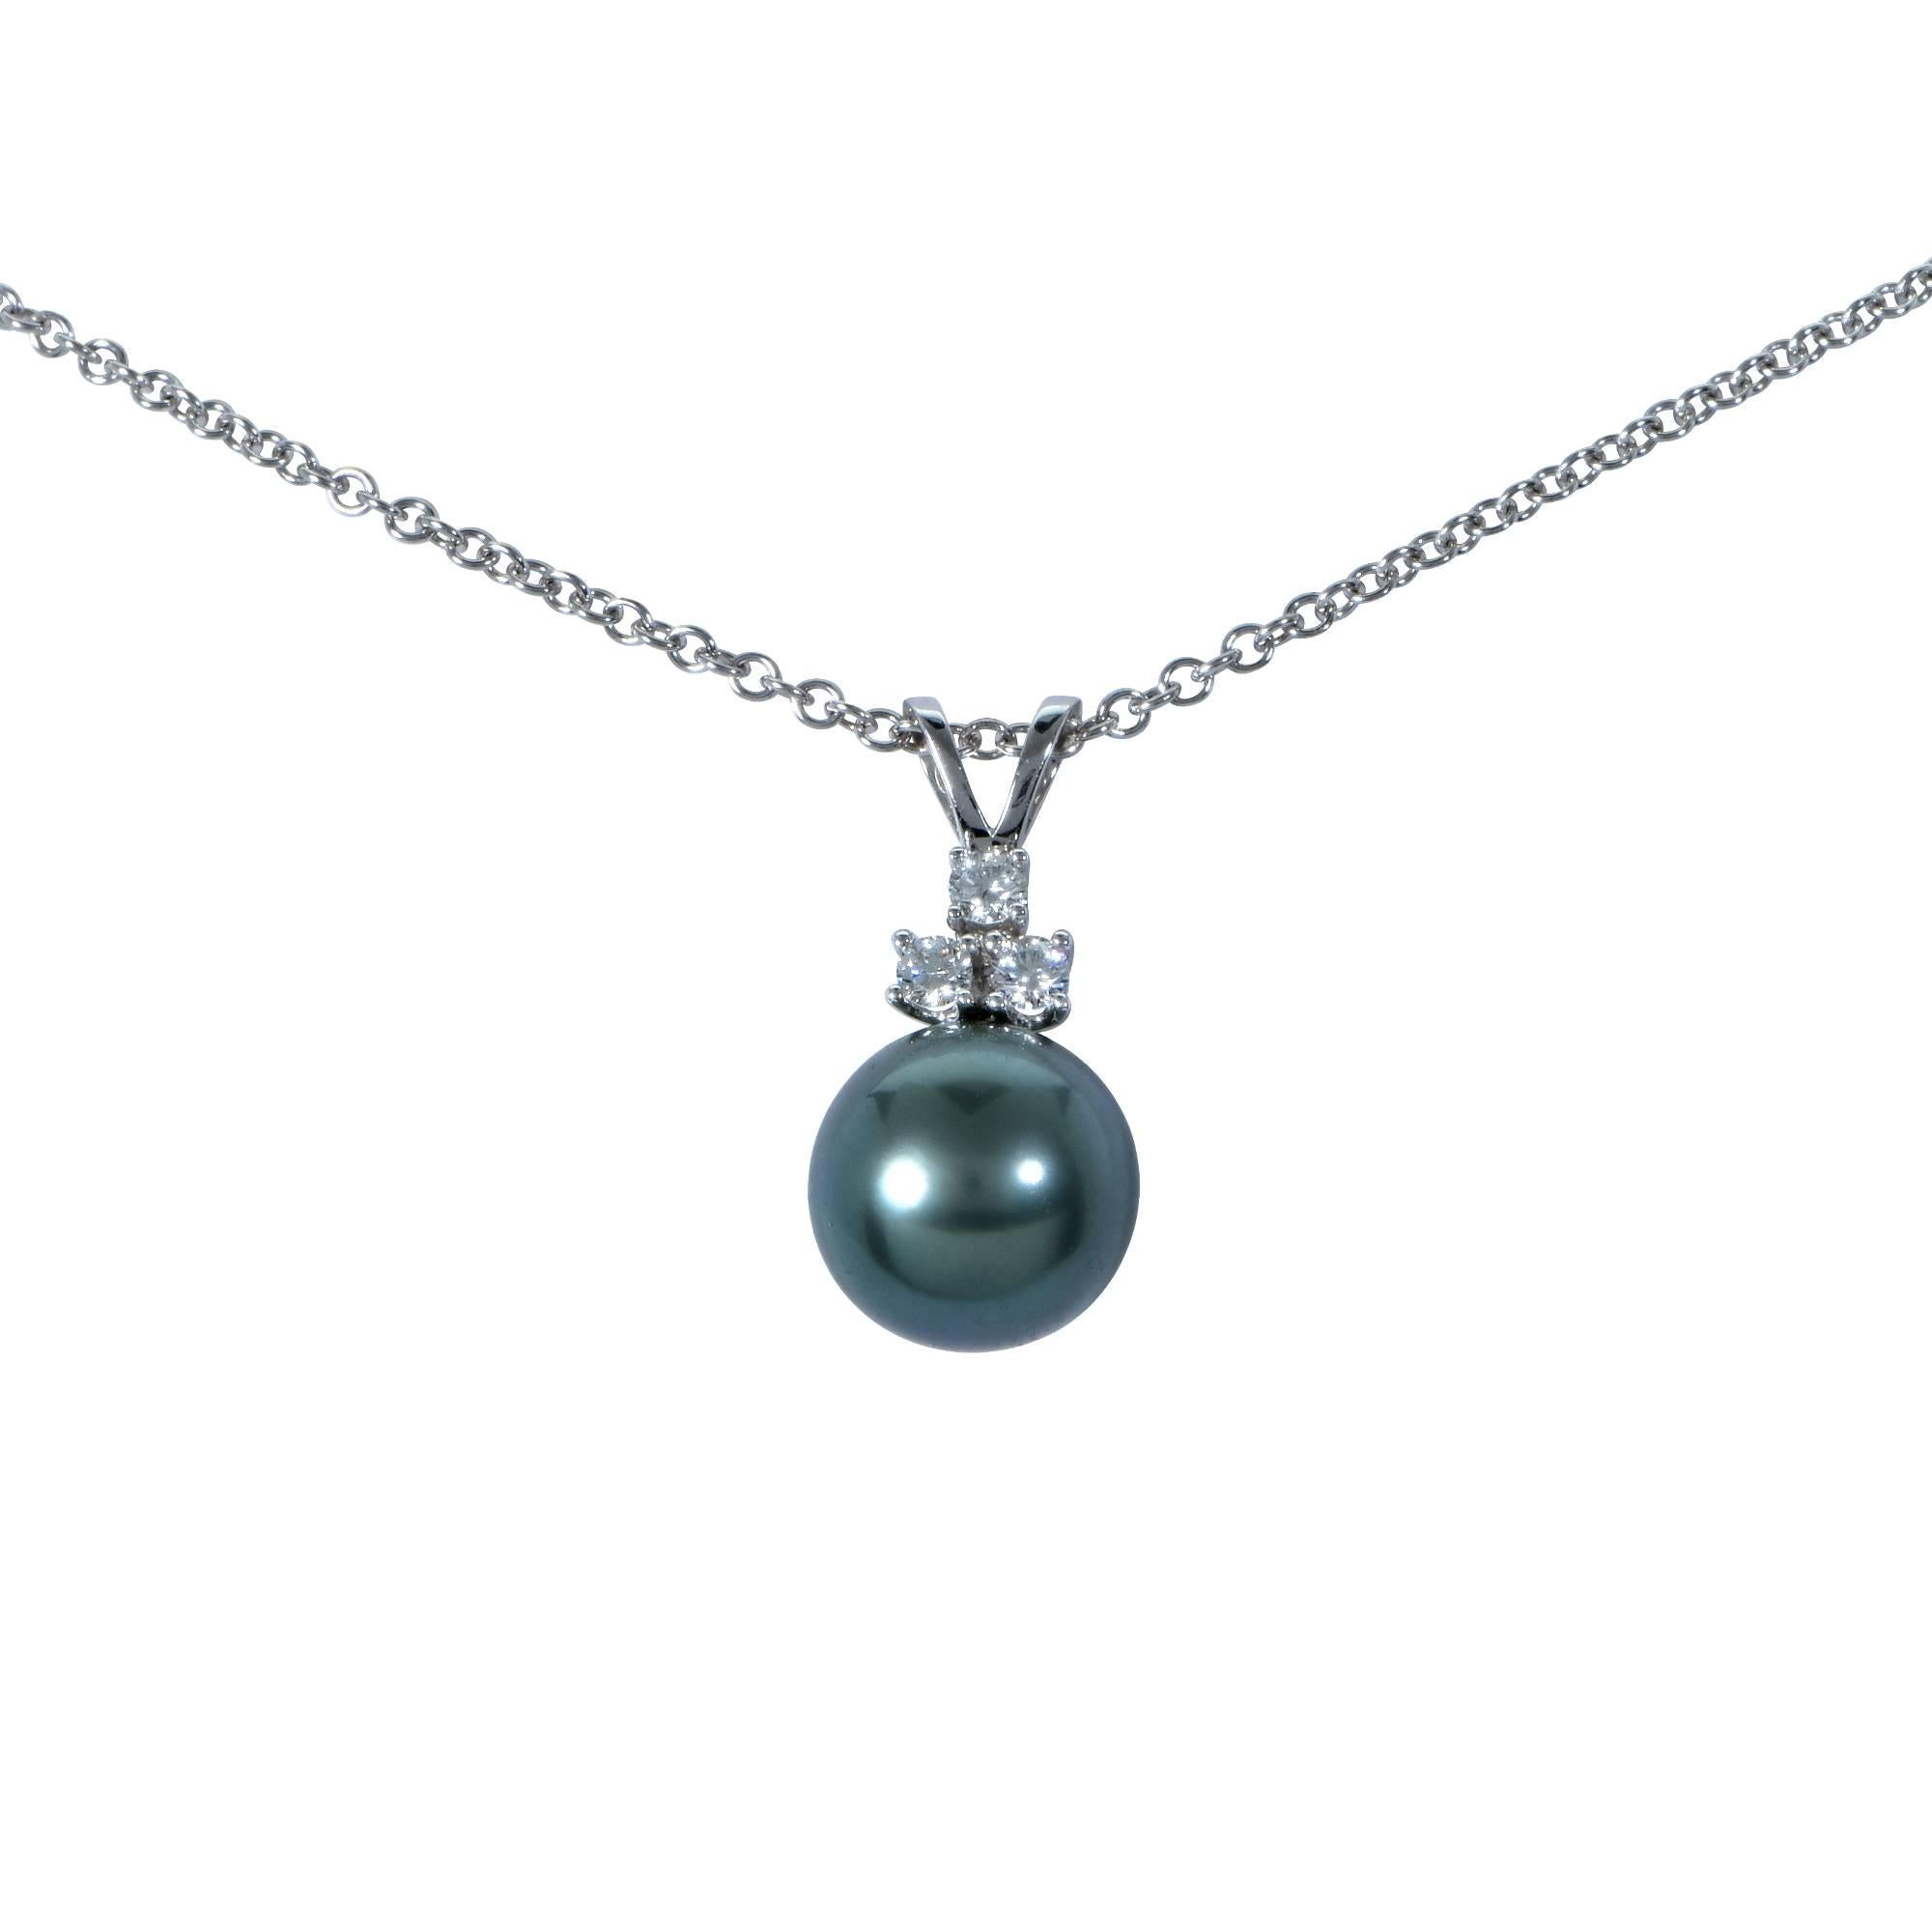 14k white gold pendant featuring a 10mm Tahitian pearl accented by 3 round brilliant cut weighing .20cts total, G color VS clarity.

Measurements are available upon request.
It is stamped and/or tested as 14k gold.
The metal weight is 3.26